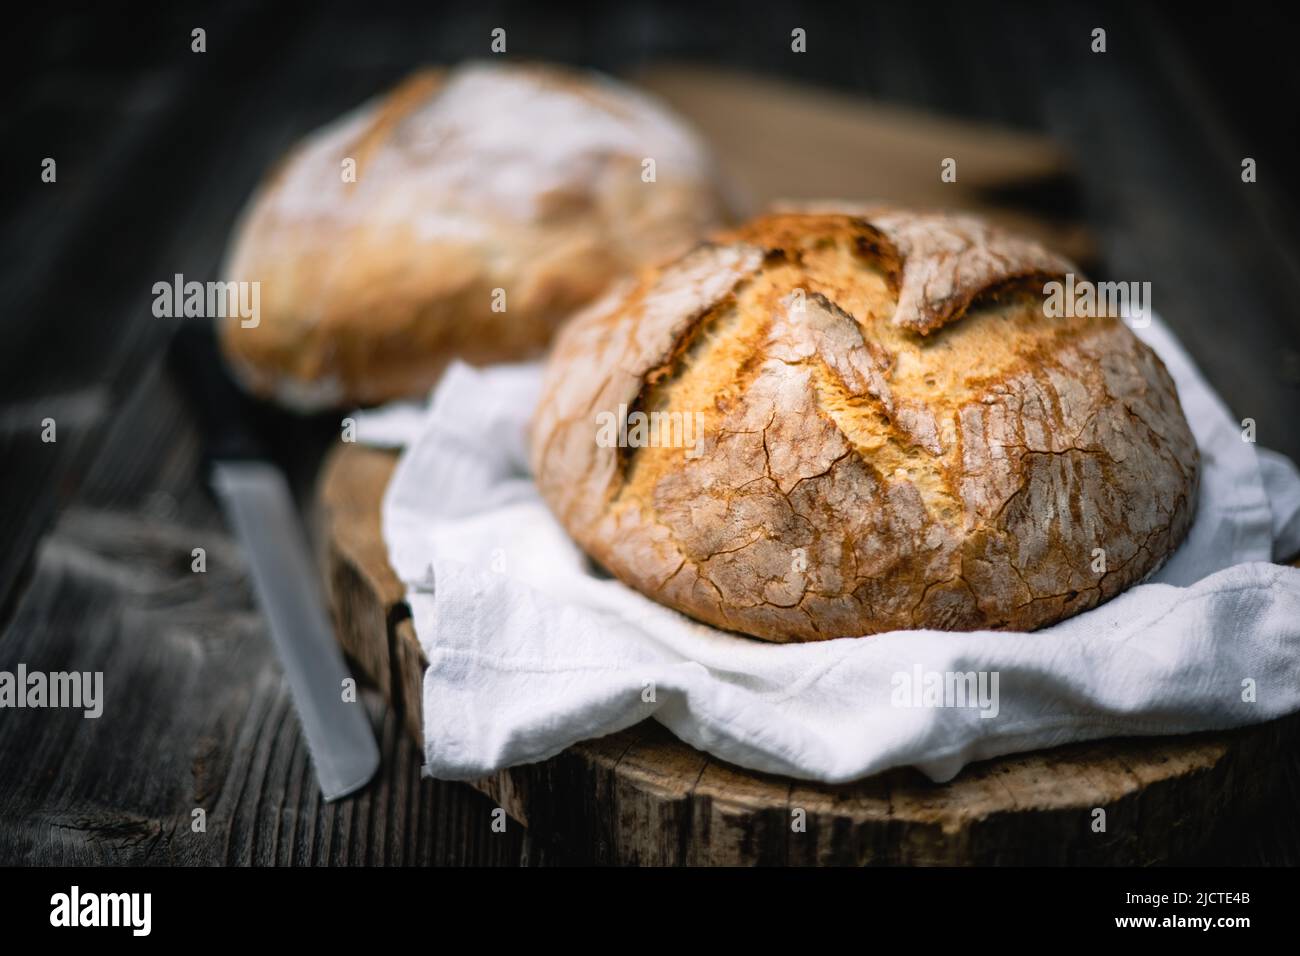 Traditional leavened sourdough bread with rought skin on a rustic wooden table. Healthy food photography Stock Photo